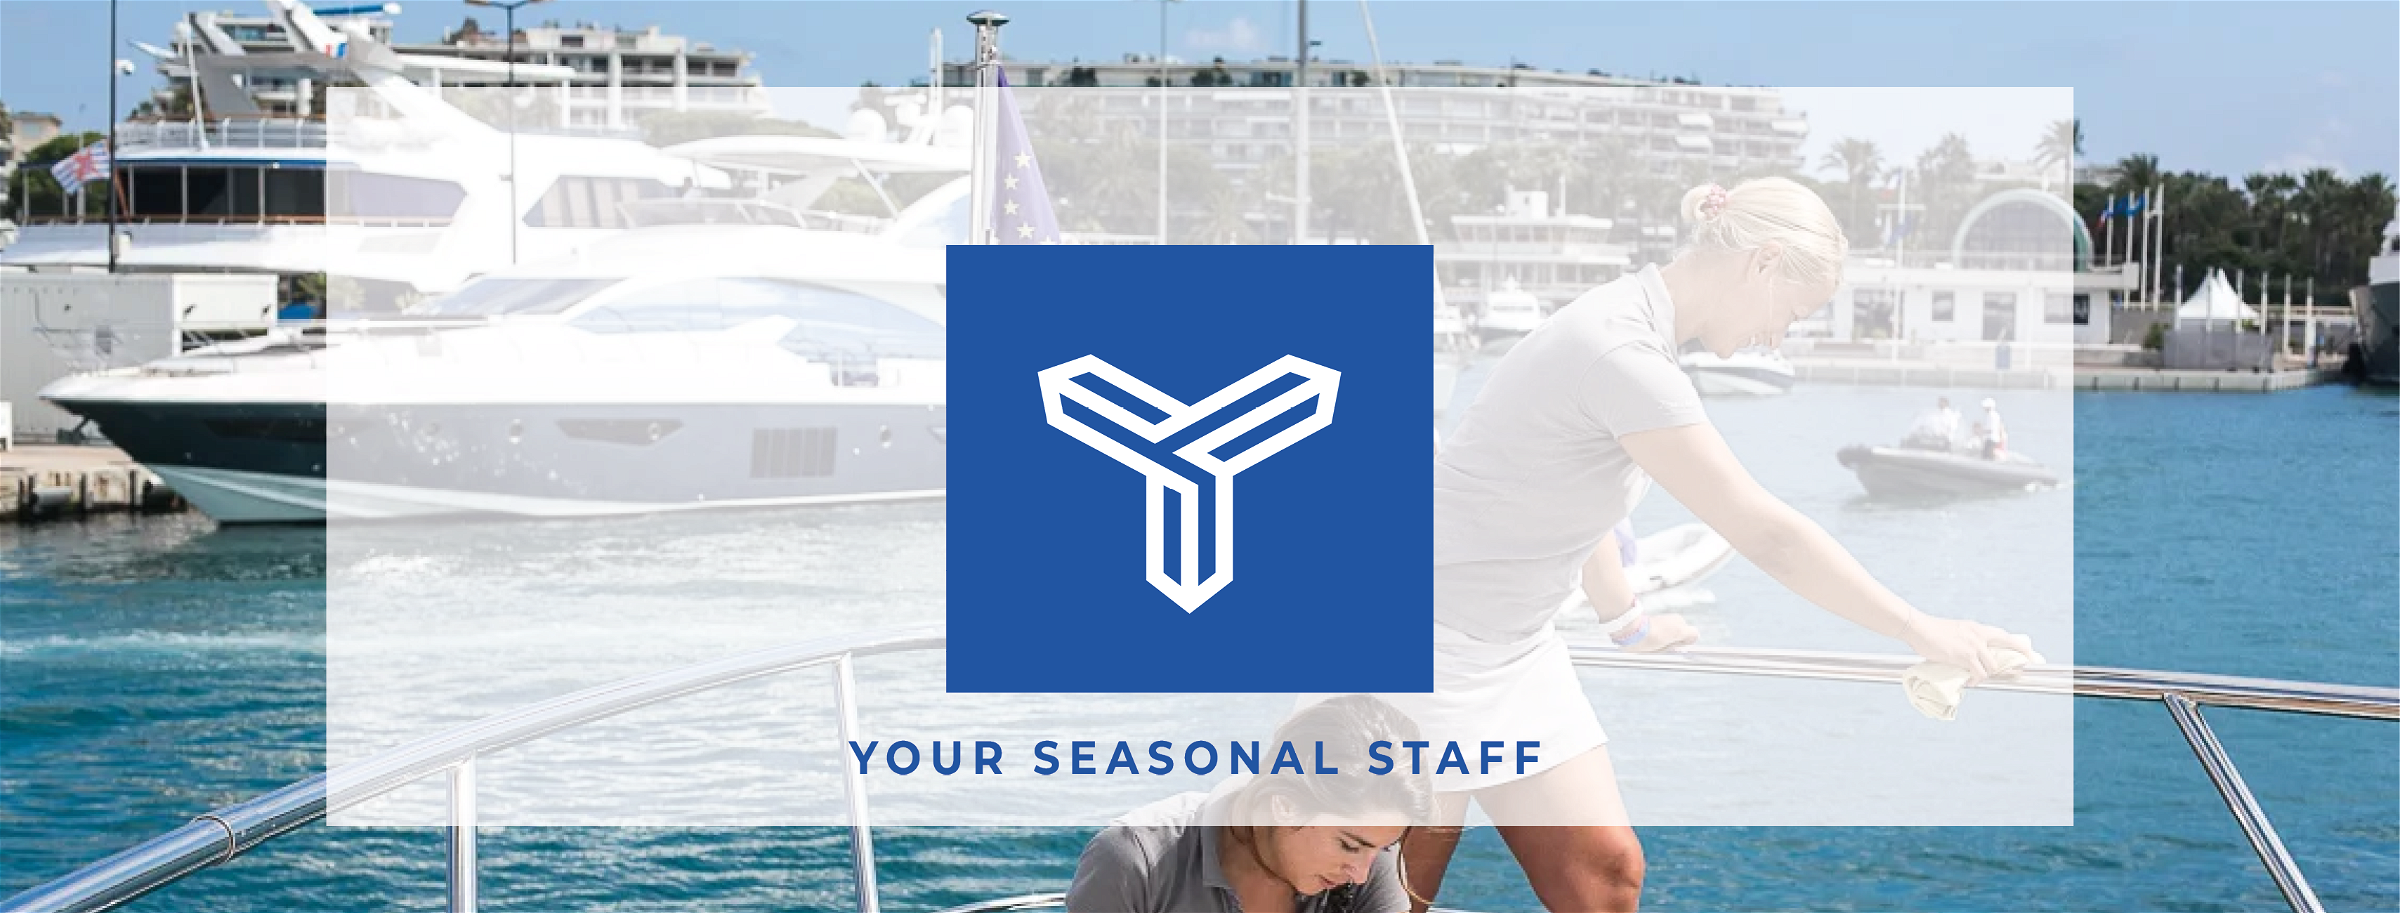 Your Seasonal Staff announcement image